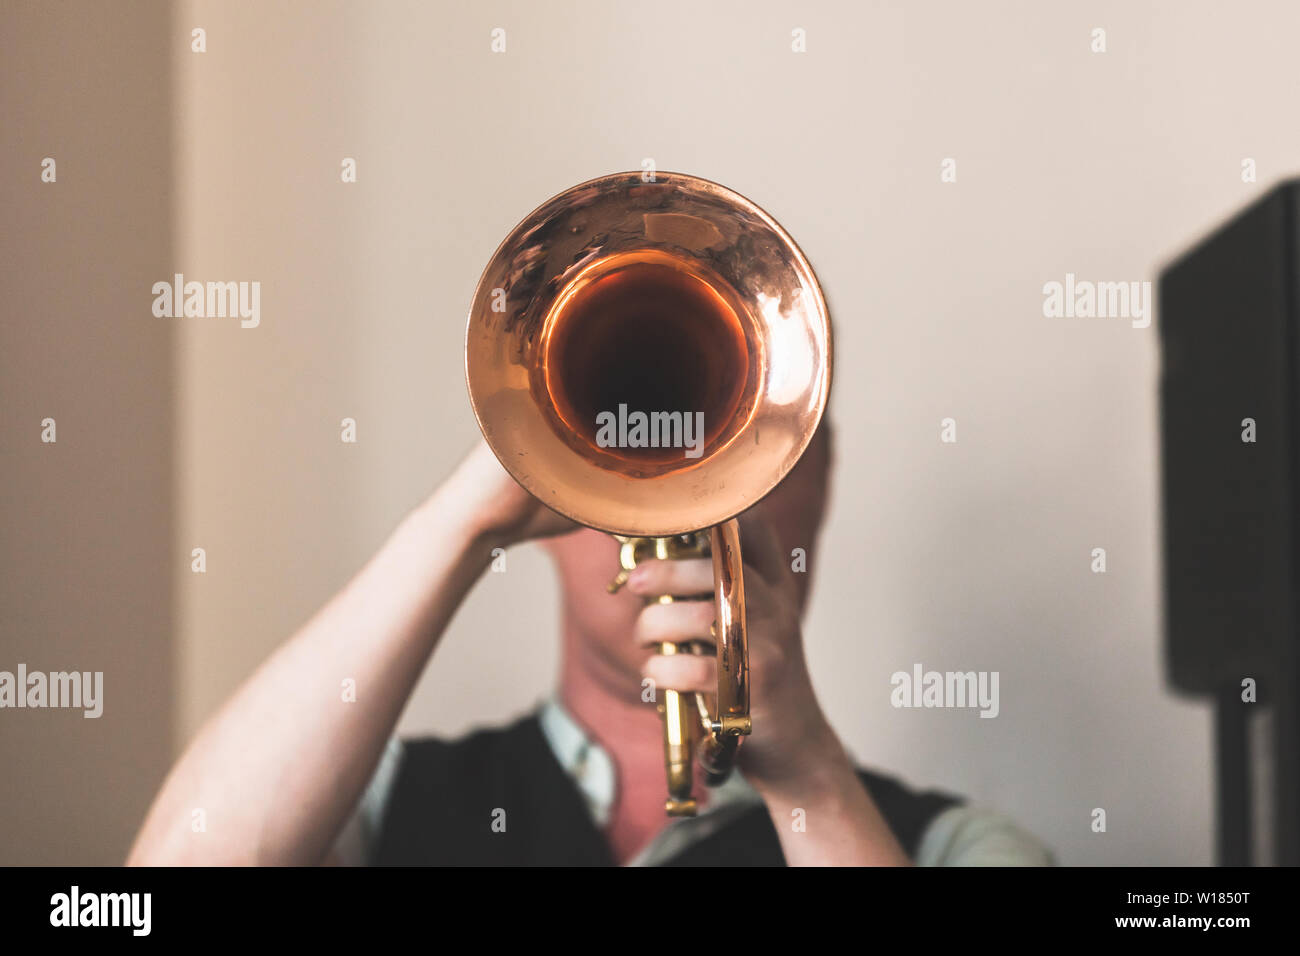 Live music background, Trumpeter with a trumpet in hands, close-up front view photo with selective focus Stock Photo